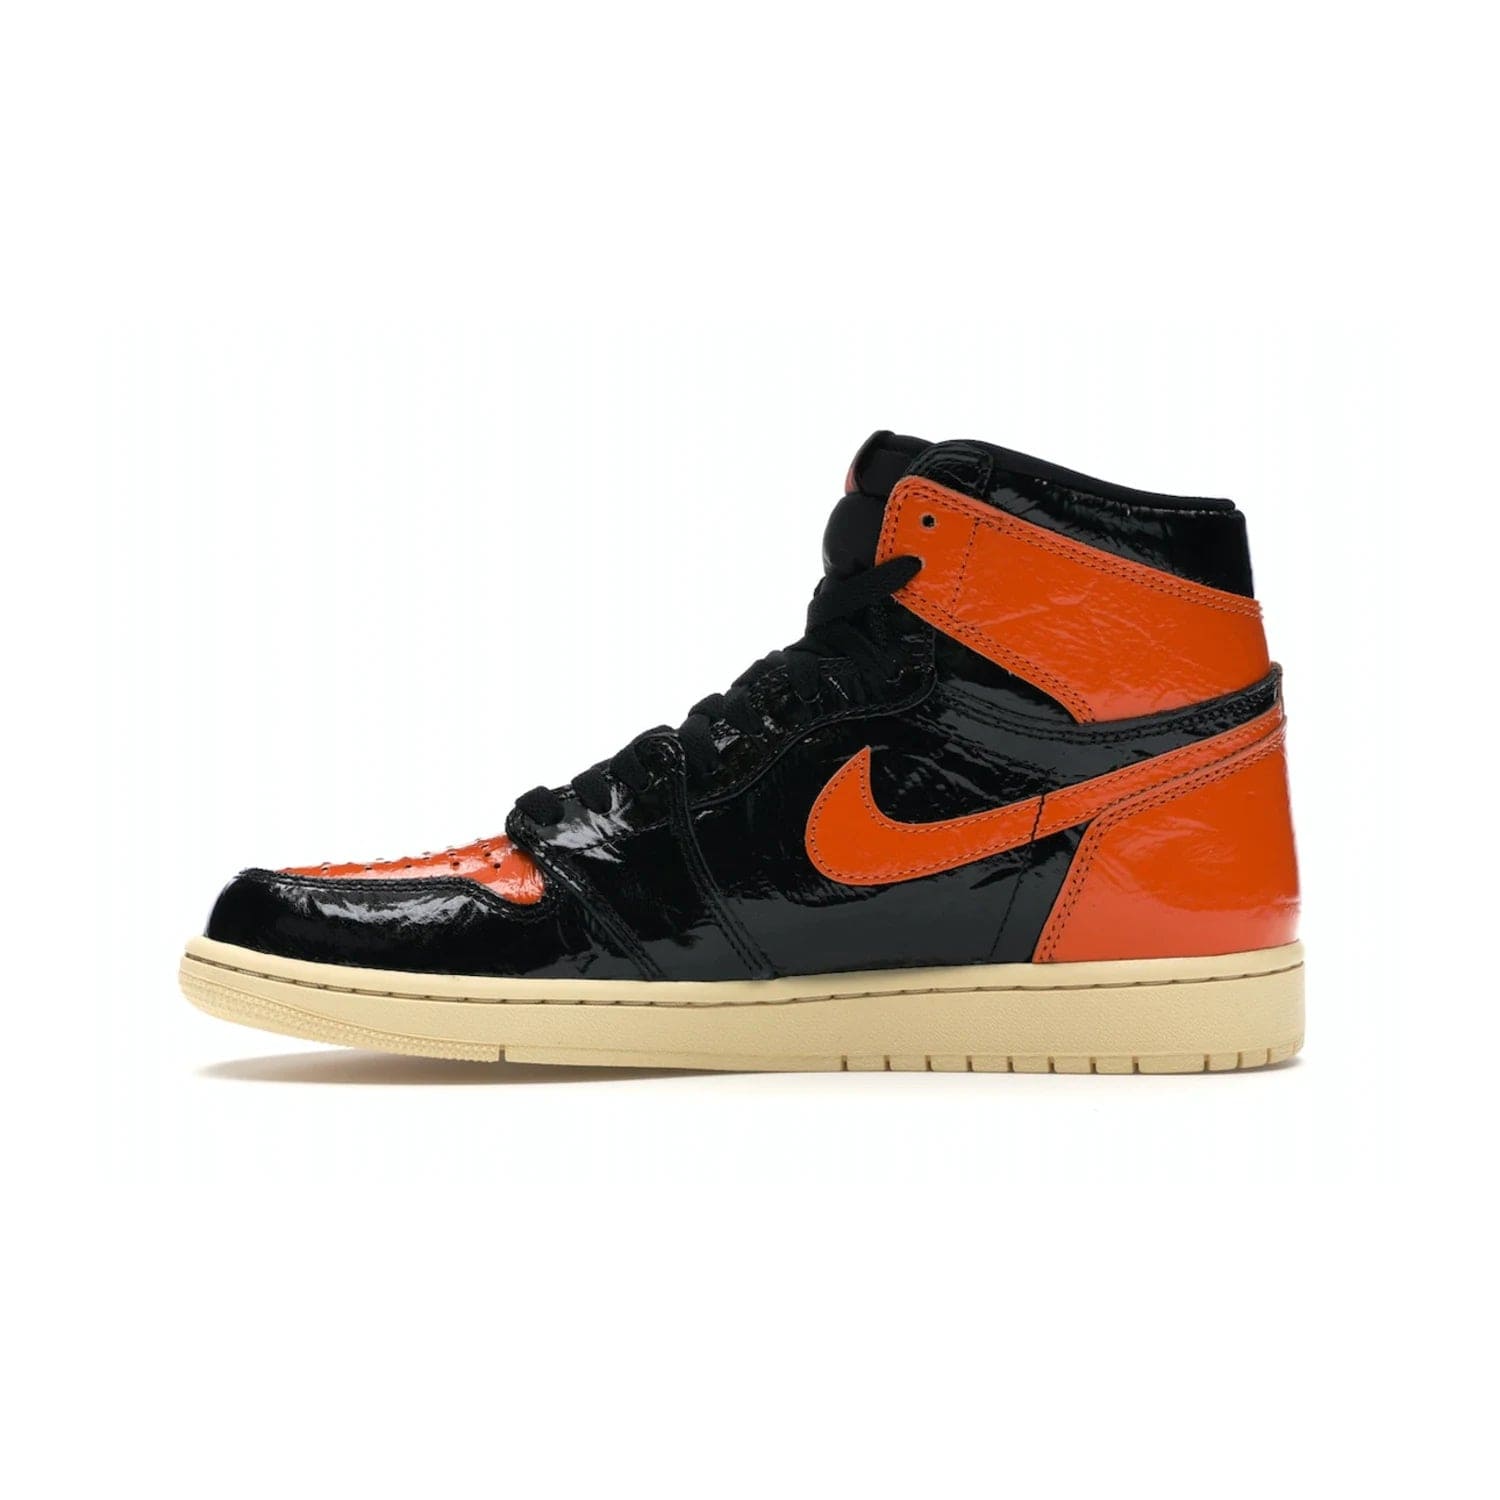 Jordan 1 Retro High Shattered Backboard 3.0 - Image 19 - Only at www.BallersClubKickz.com - #
Jordan 1 Retro High Shattered Backboard 3.0: the perfect blend of modern style and nostalgic flair featuring an orange and black crinkled patent leather upper and yellowed vanilla outsole. Get these exclusive sneakers released in October of 2019!